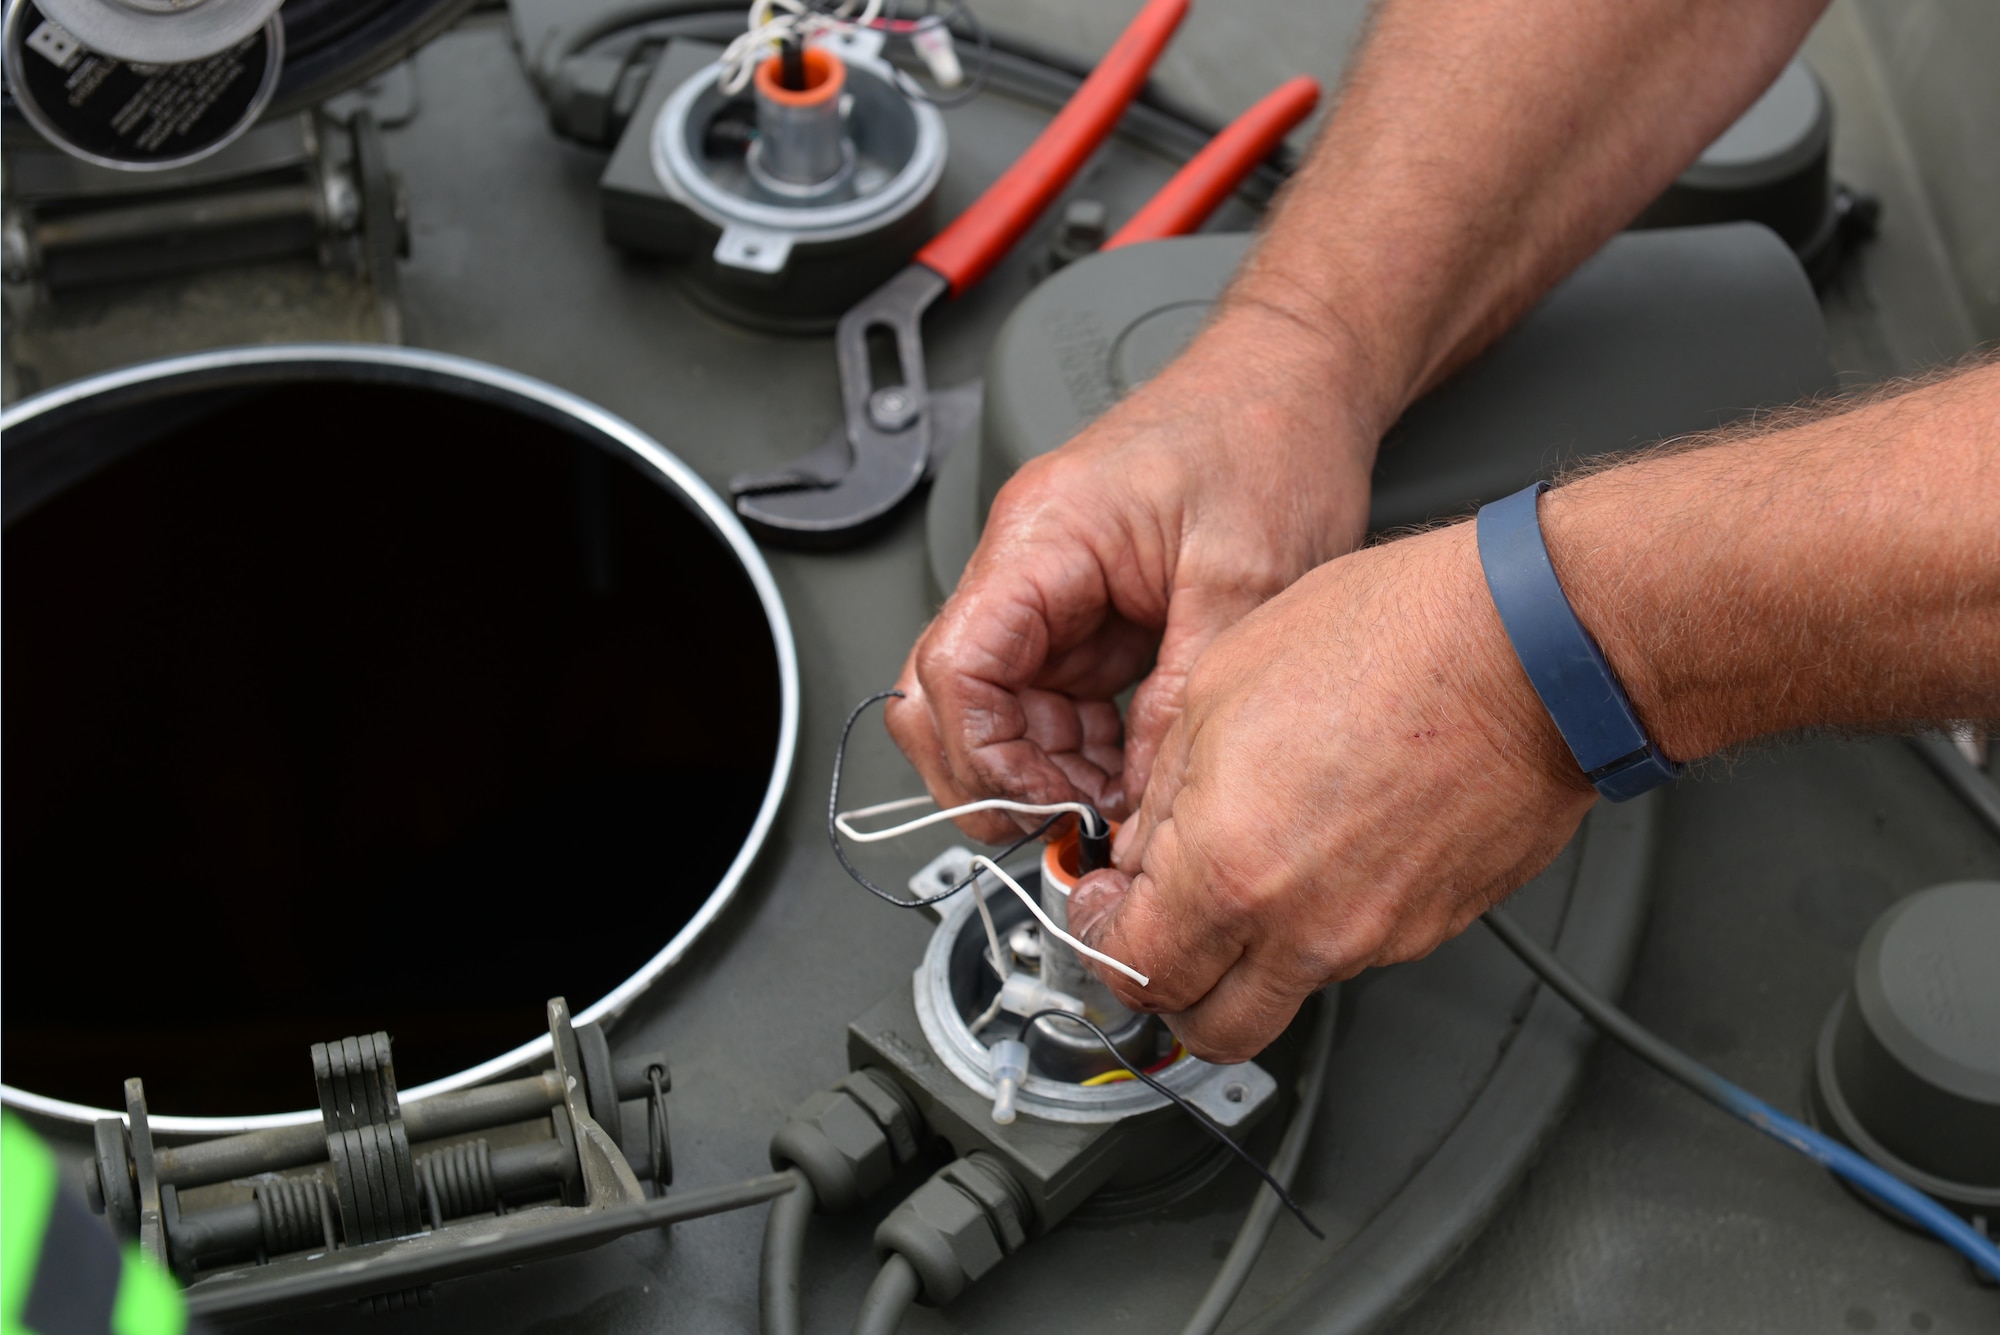 Joe Robinson, 4th Logistics Readiness Squadron fire truck and refueling maintenance technician, adjusts a fuel sensor on the new Isometrics R-11 Refueler, May 17, 2016, at Seymour Johnson Air Force Base, North Carolina. The new R-11 has more automatic features to help prevent fuel waste and accidents. (U.S. Air Force photo by Airman 1st Class Ashley Williamson)